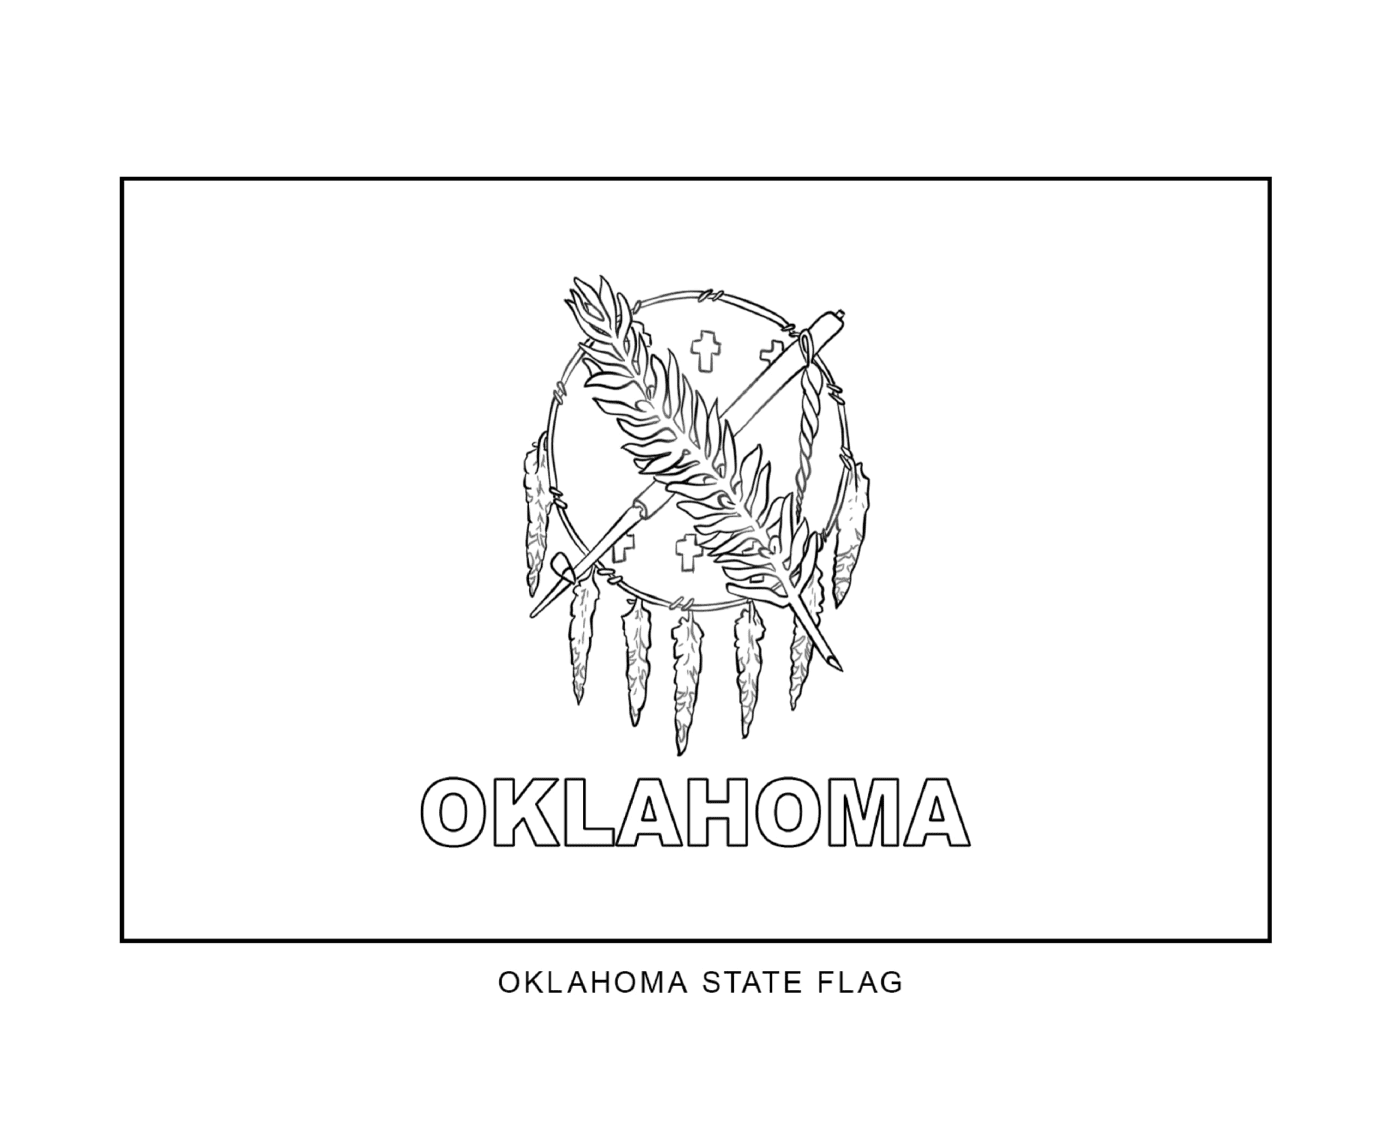  Flag of the State of Oklahoma drawn 